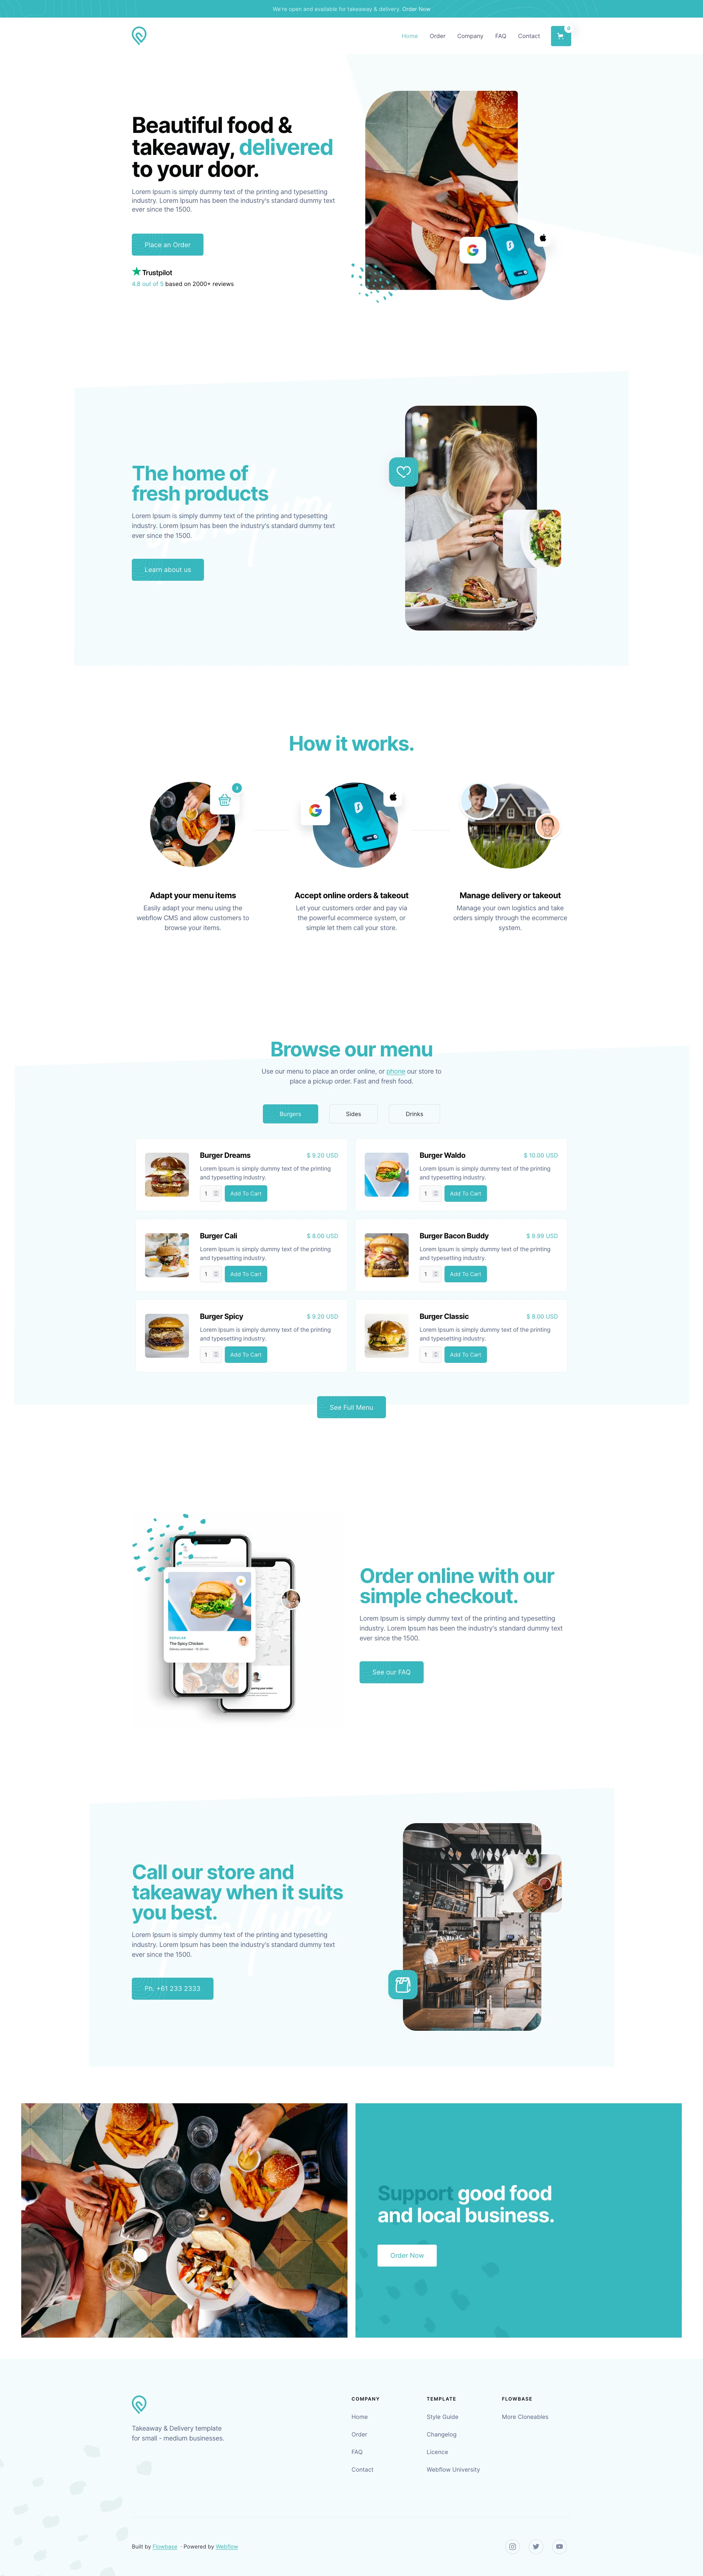 Chomp Restaurant - Free Webflow Template - Chomp Webflow Ecommerce Template is the complete package for businesses wanting to provide & sell their products online. Tailored towards restaurants and the food industry, your business can rapidly adjust the template and provide a beautiful e-commerce experience.